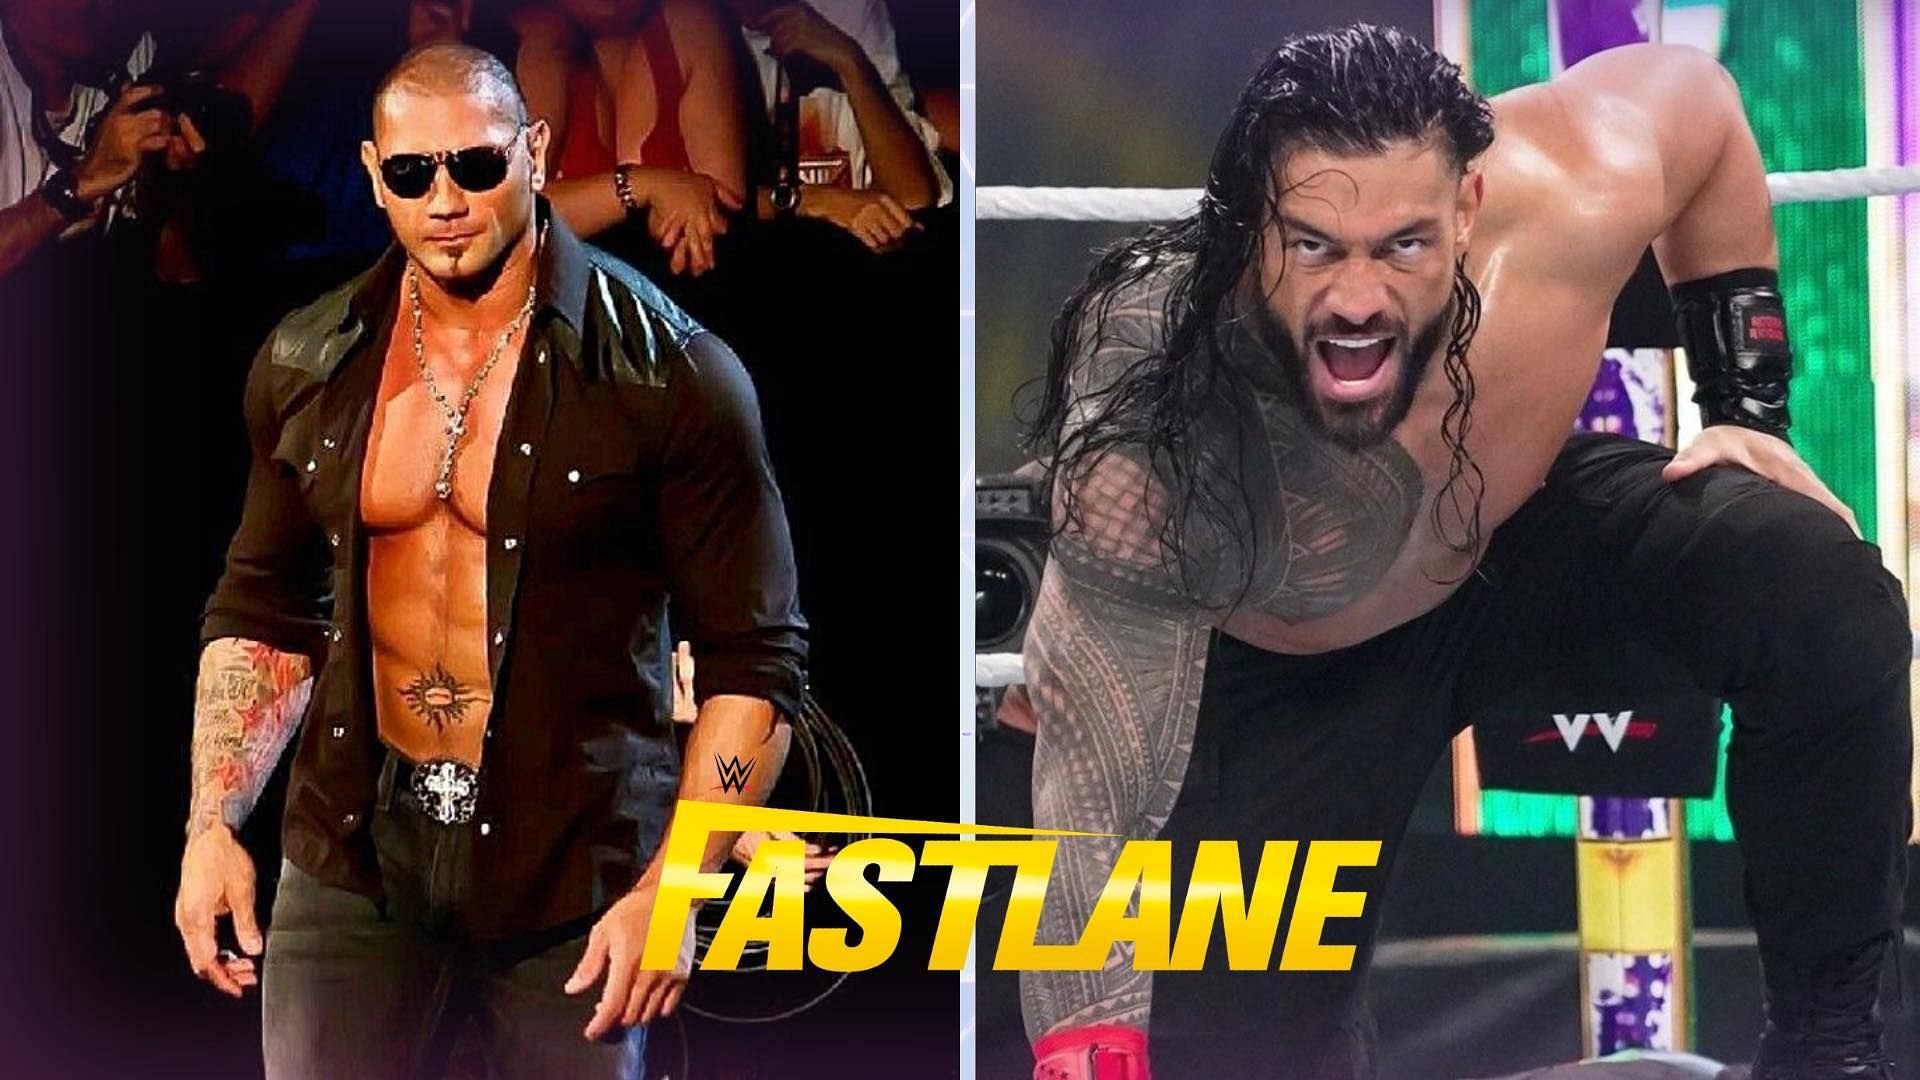 Batista could potentially return to WWE for the Fastlane event